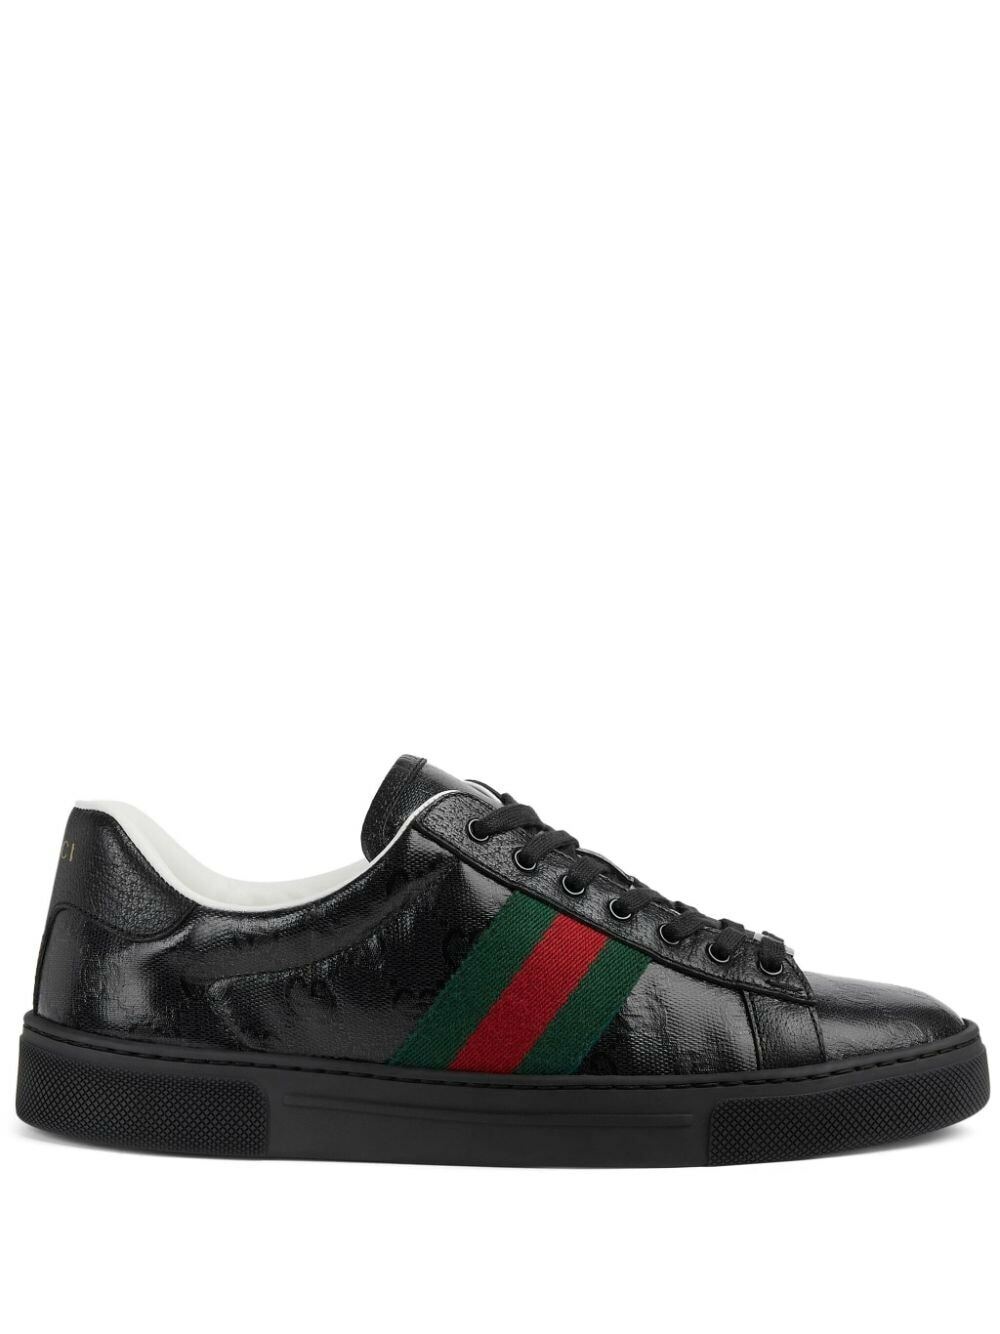 Photo: GUCCI - Ace Web Detail Sneakers